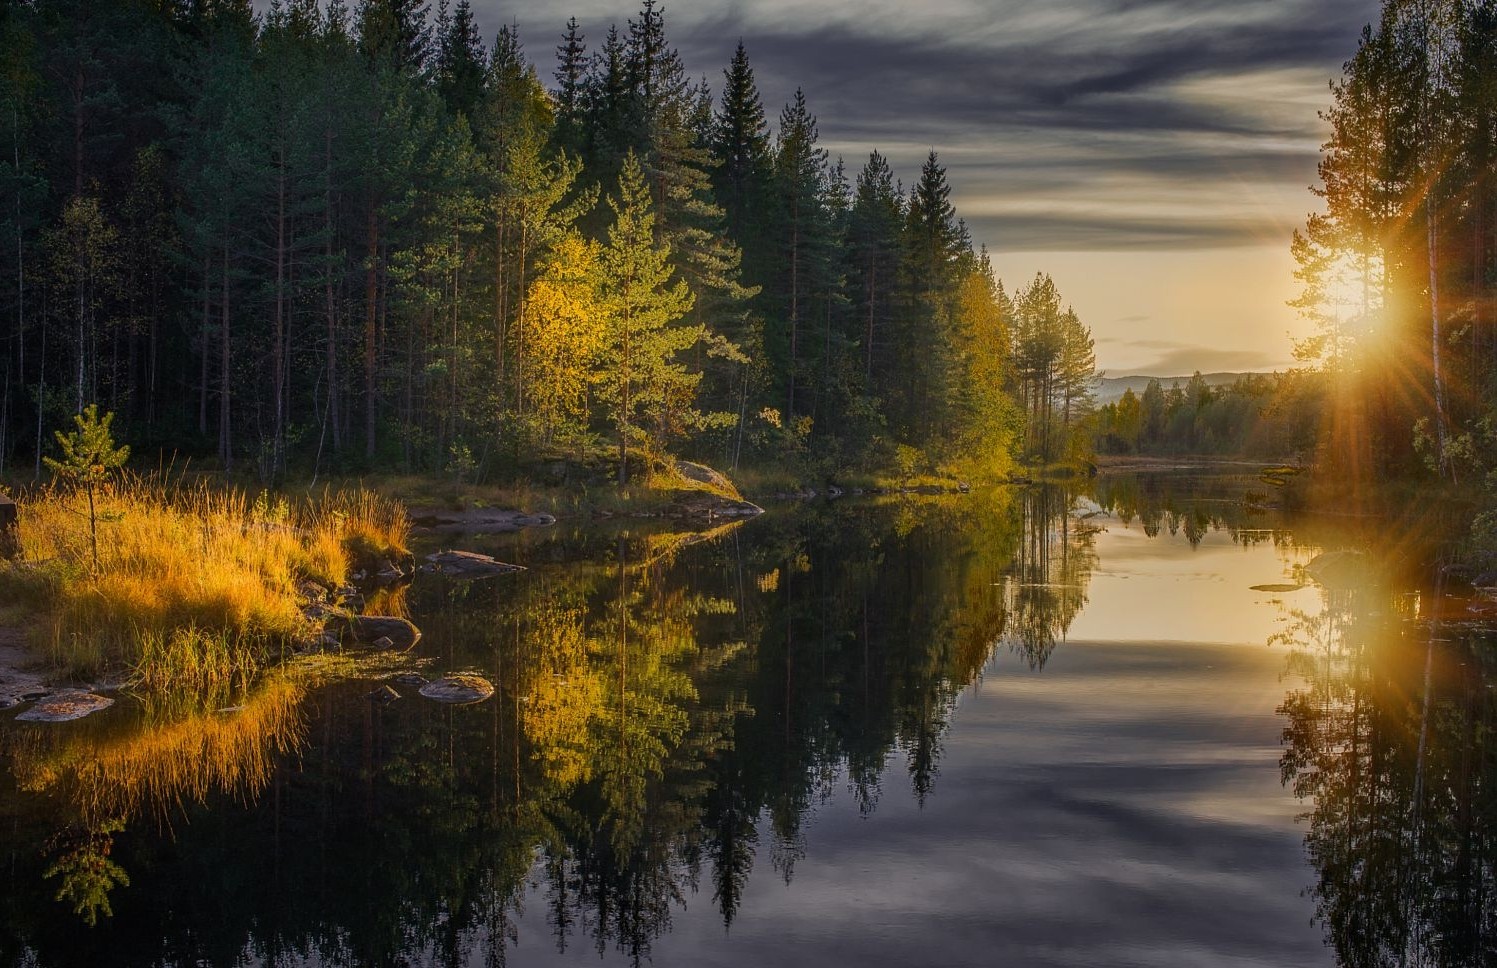 landscape, Photography, Nature, Forest, Fall, River, Calm waters, Sunset, Reflection, Pine trees, Sun rays, Finland Wallpaper